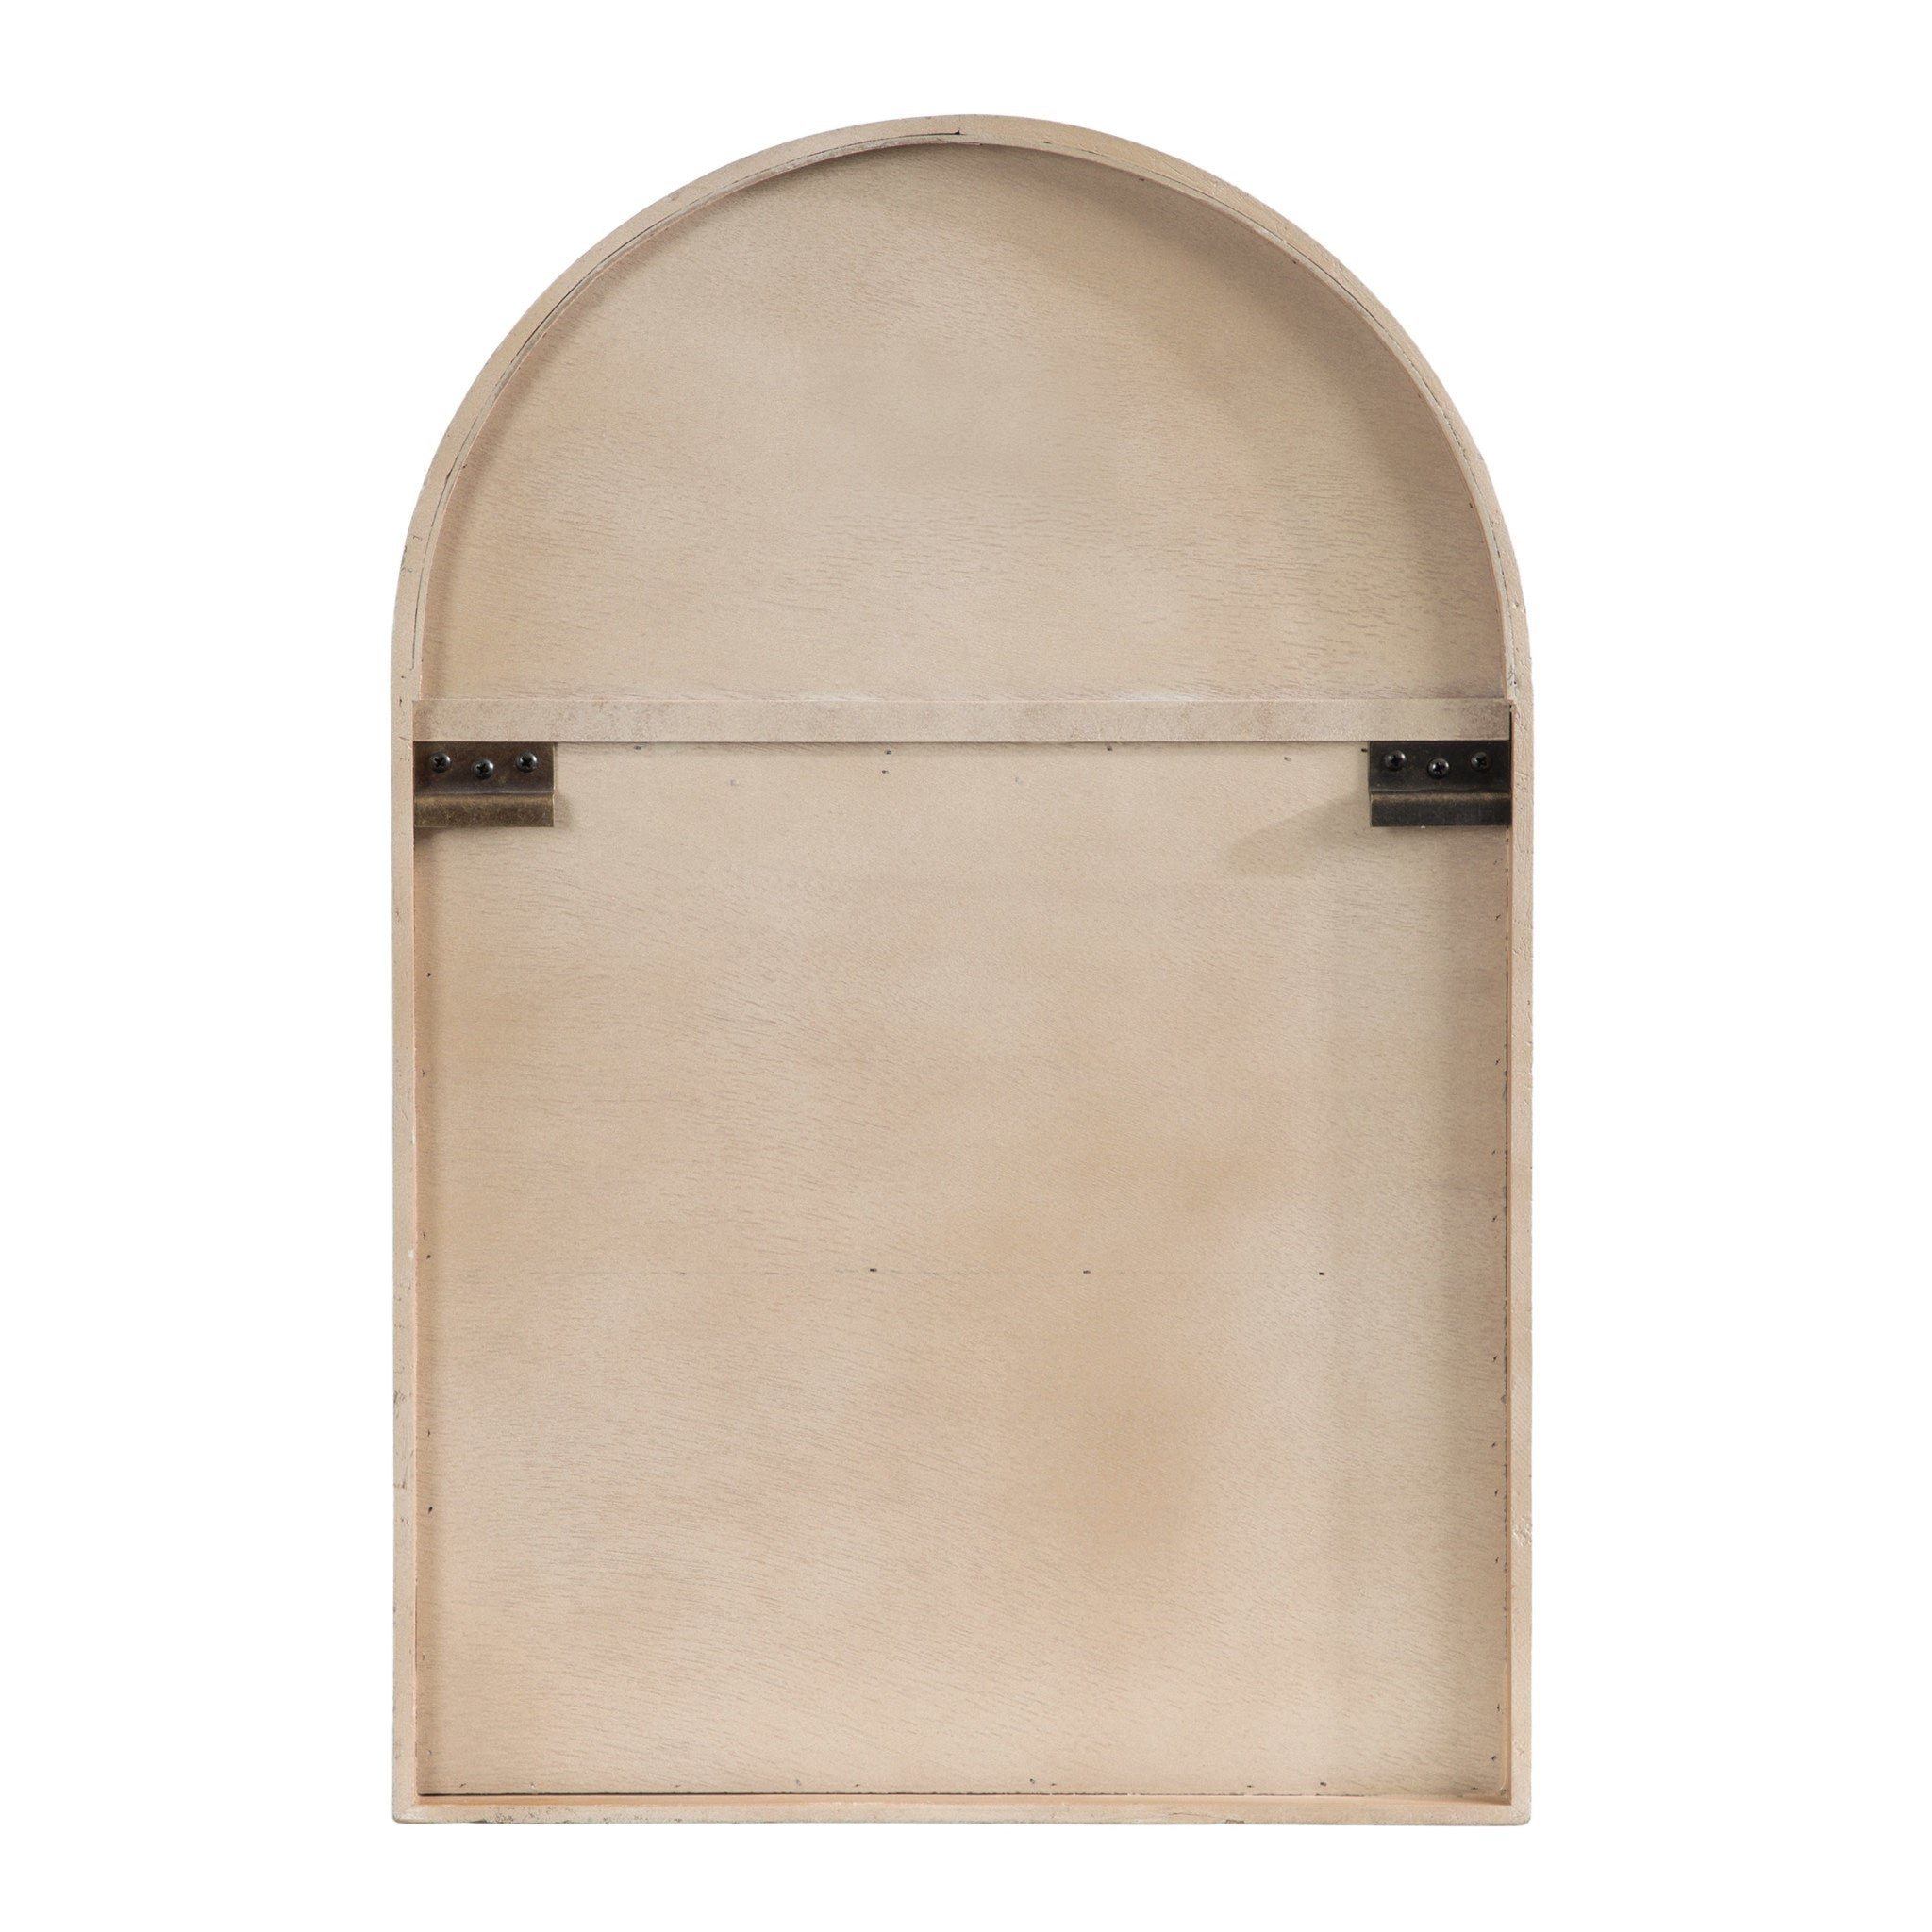 Megara Arched Wall Mounted Cabinet